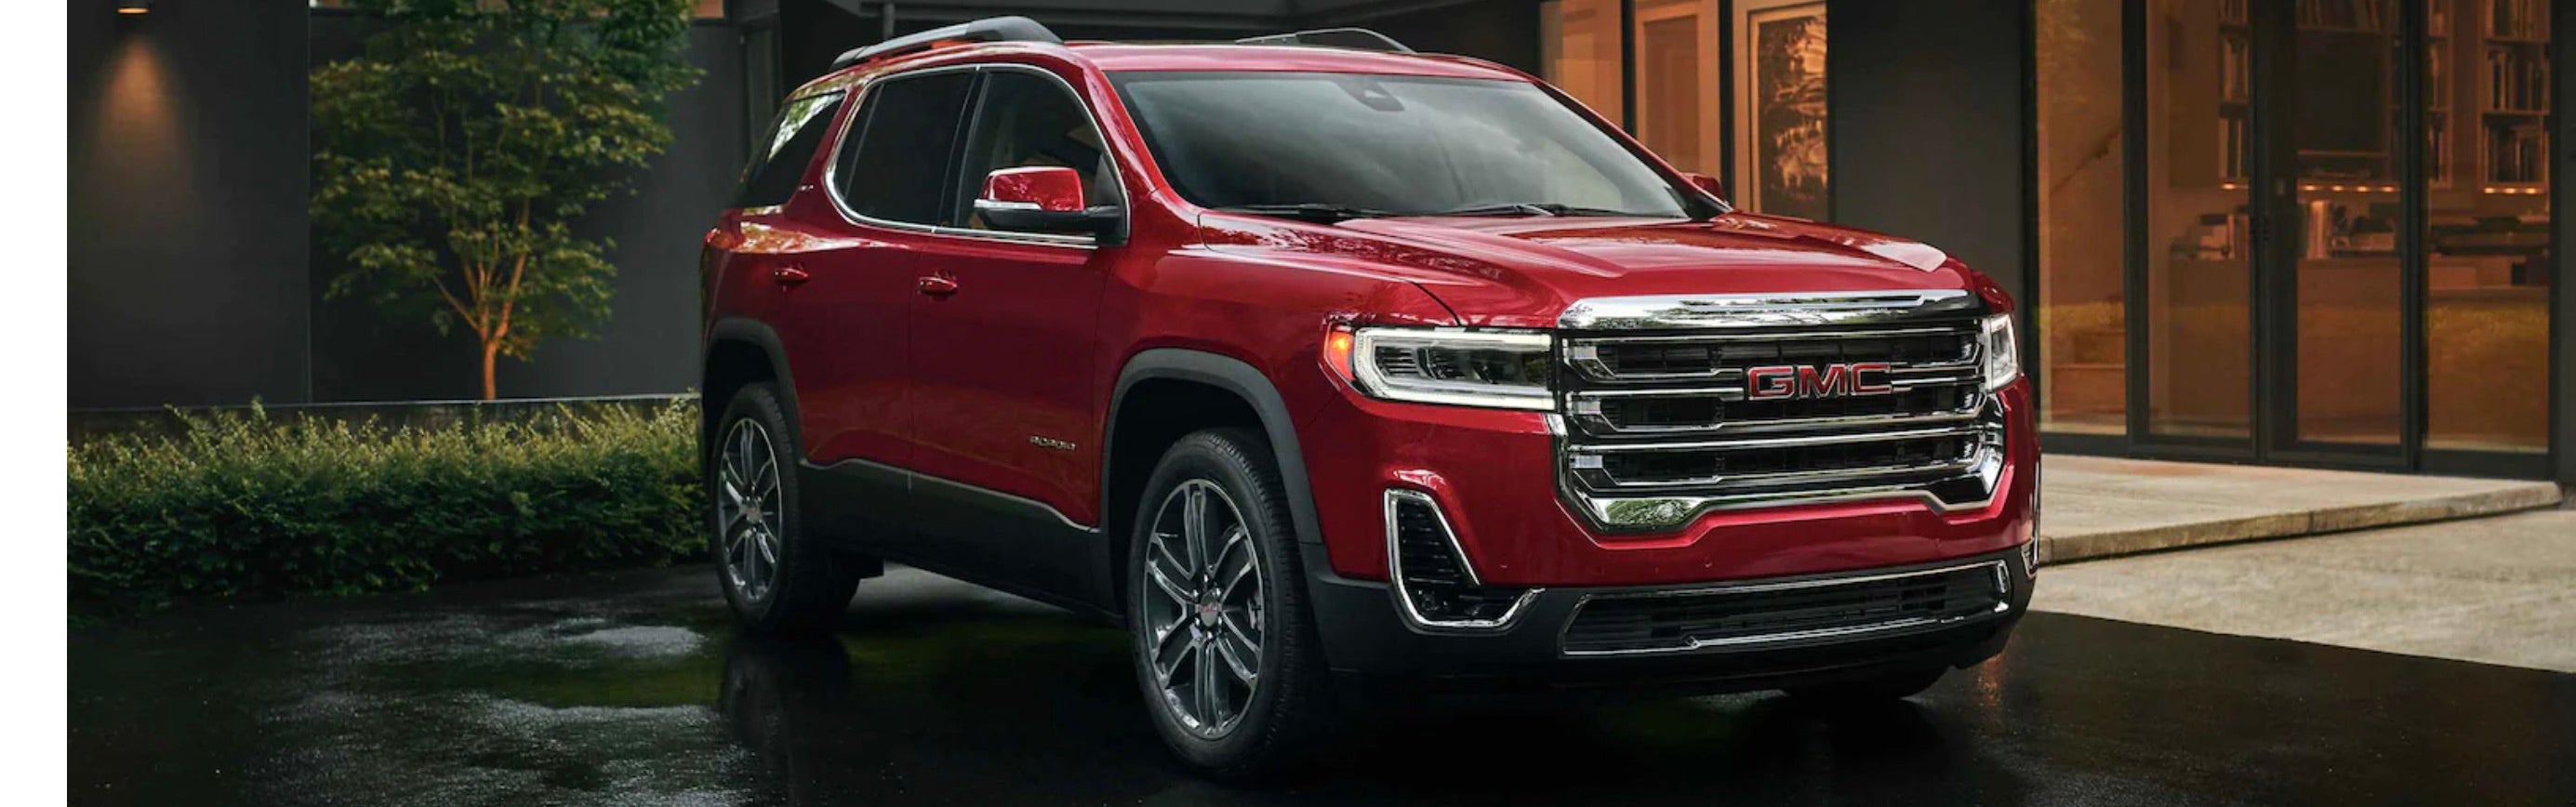 A used GMC ACADIA from Bachrodt On State serving Rockford, IL.